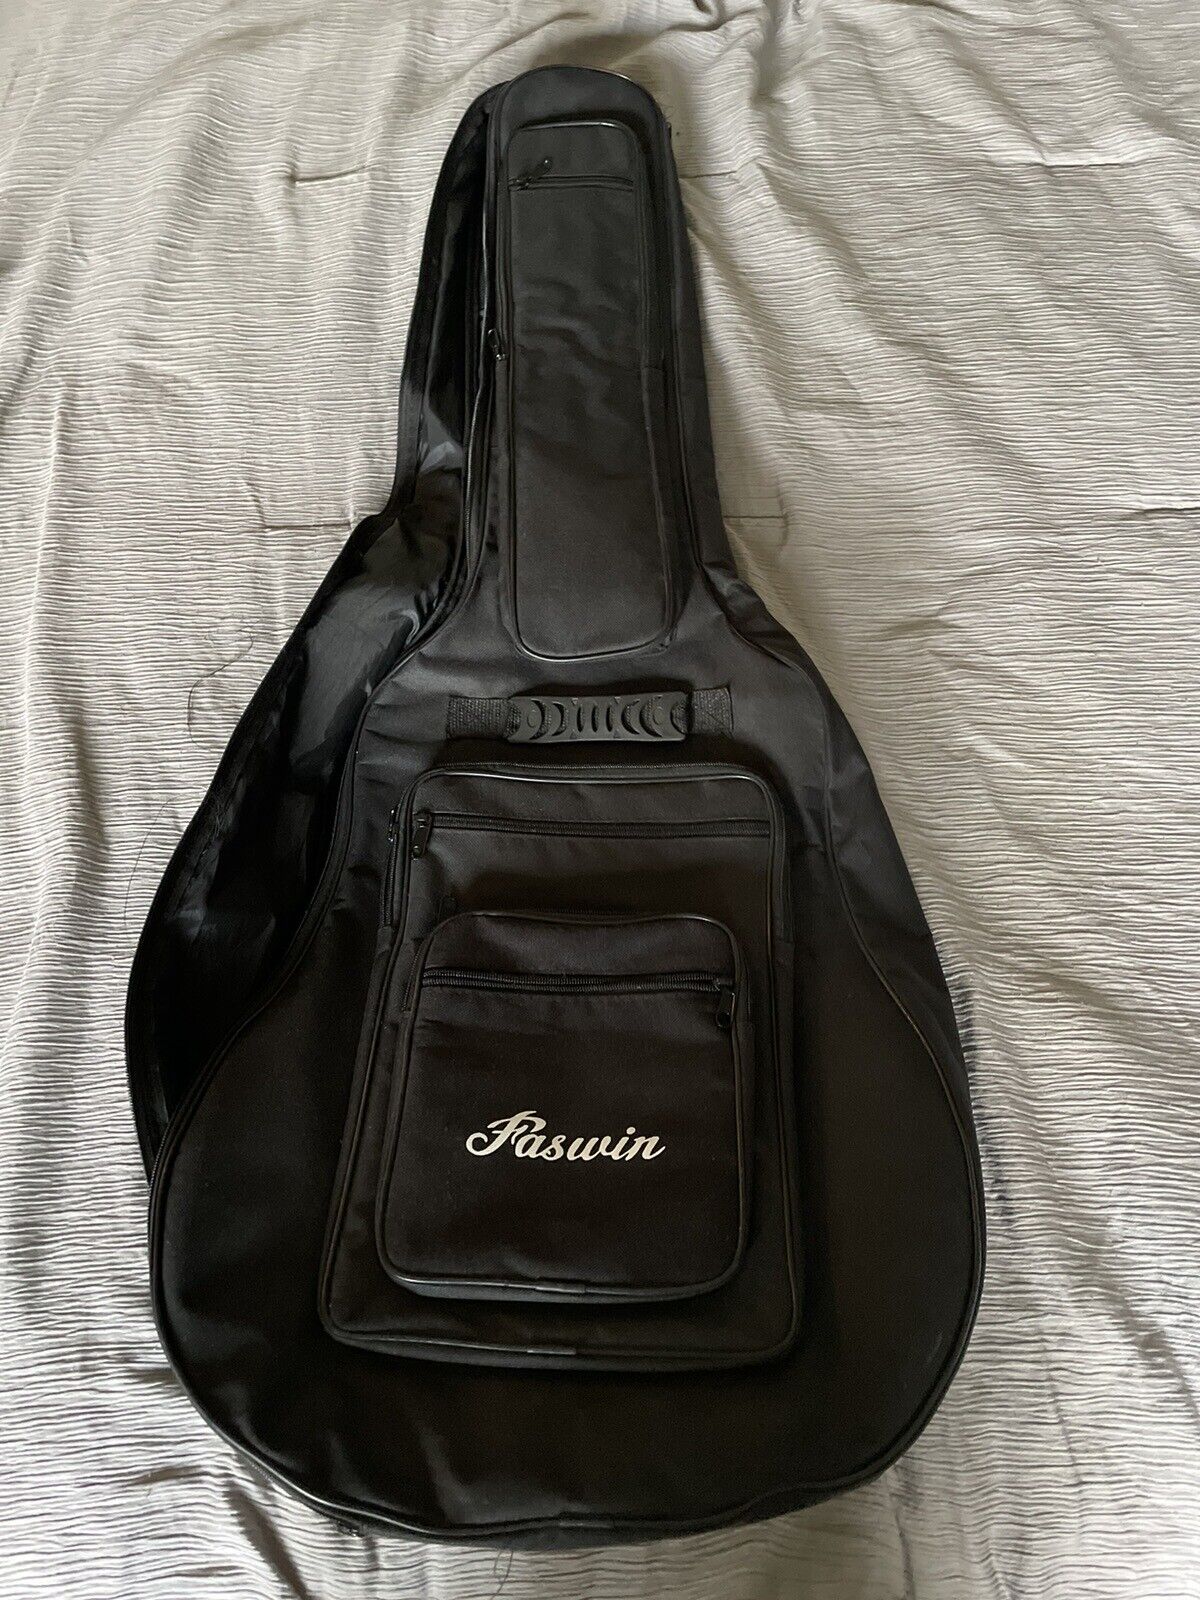 acoustic guitar used 5